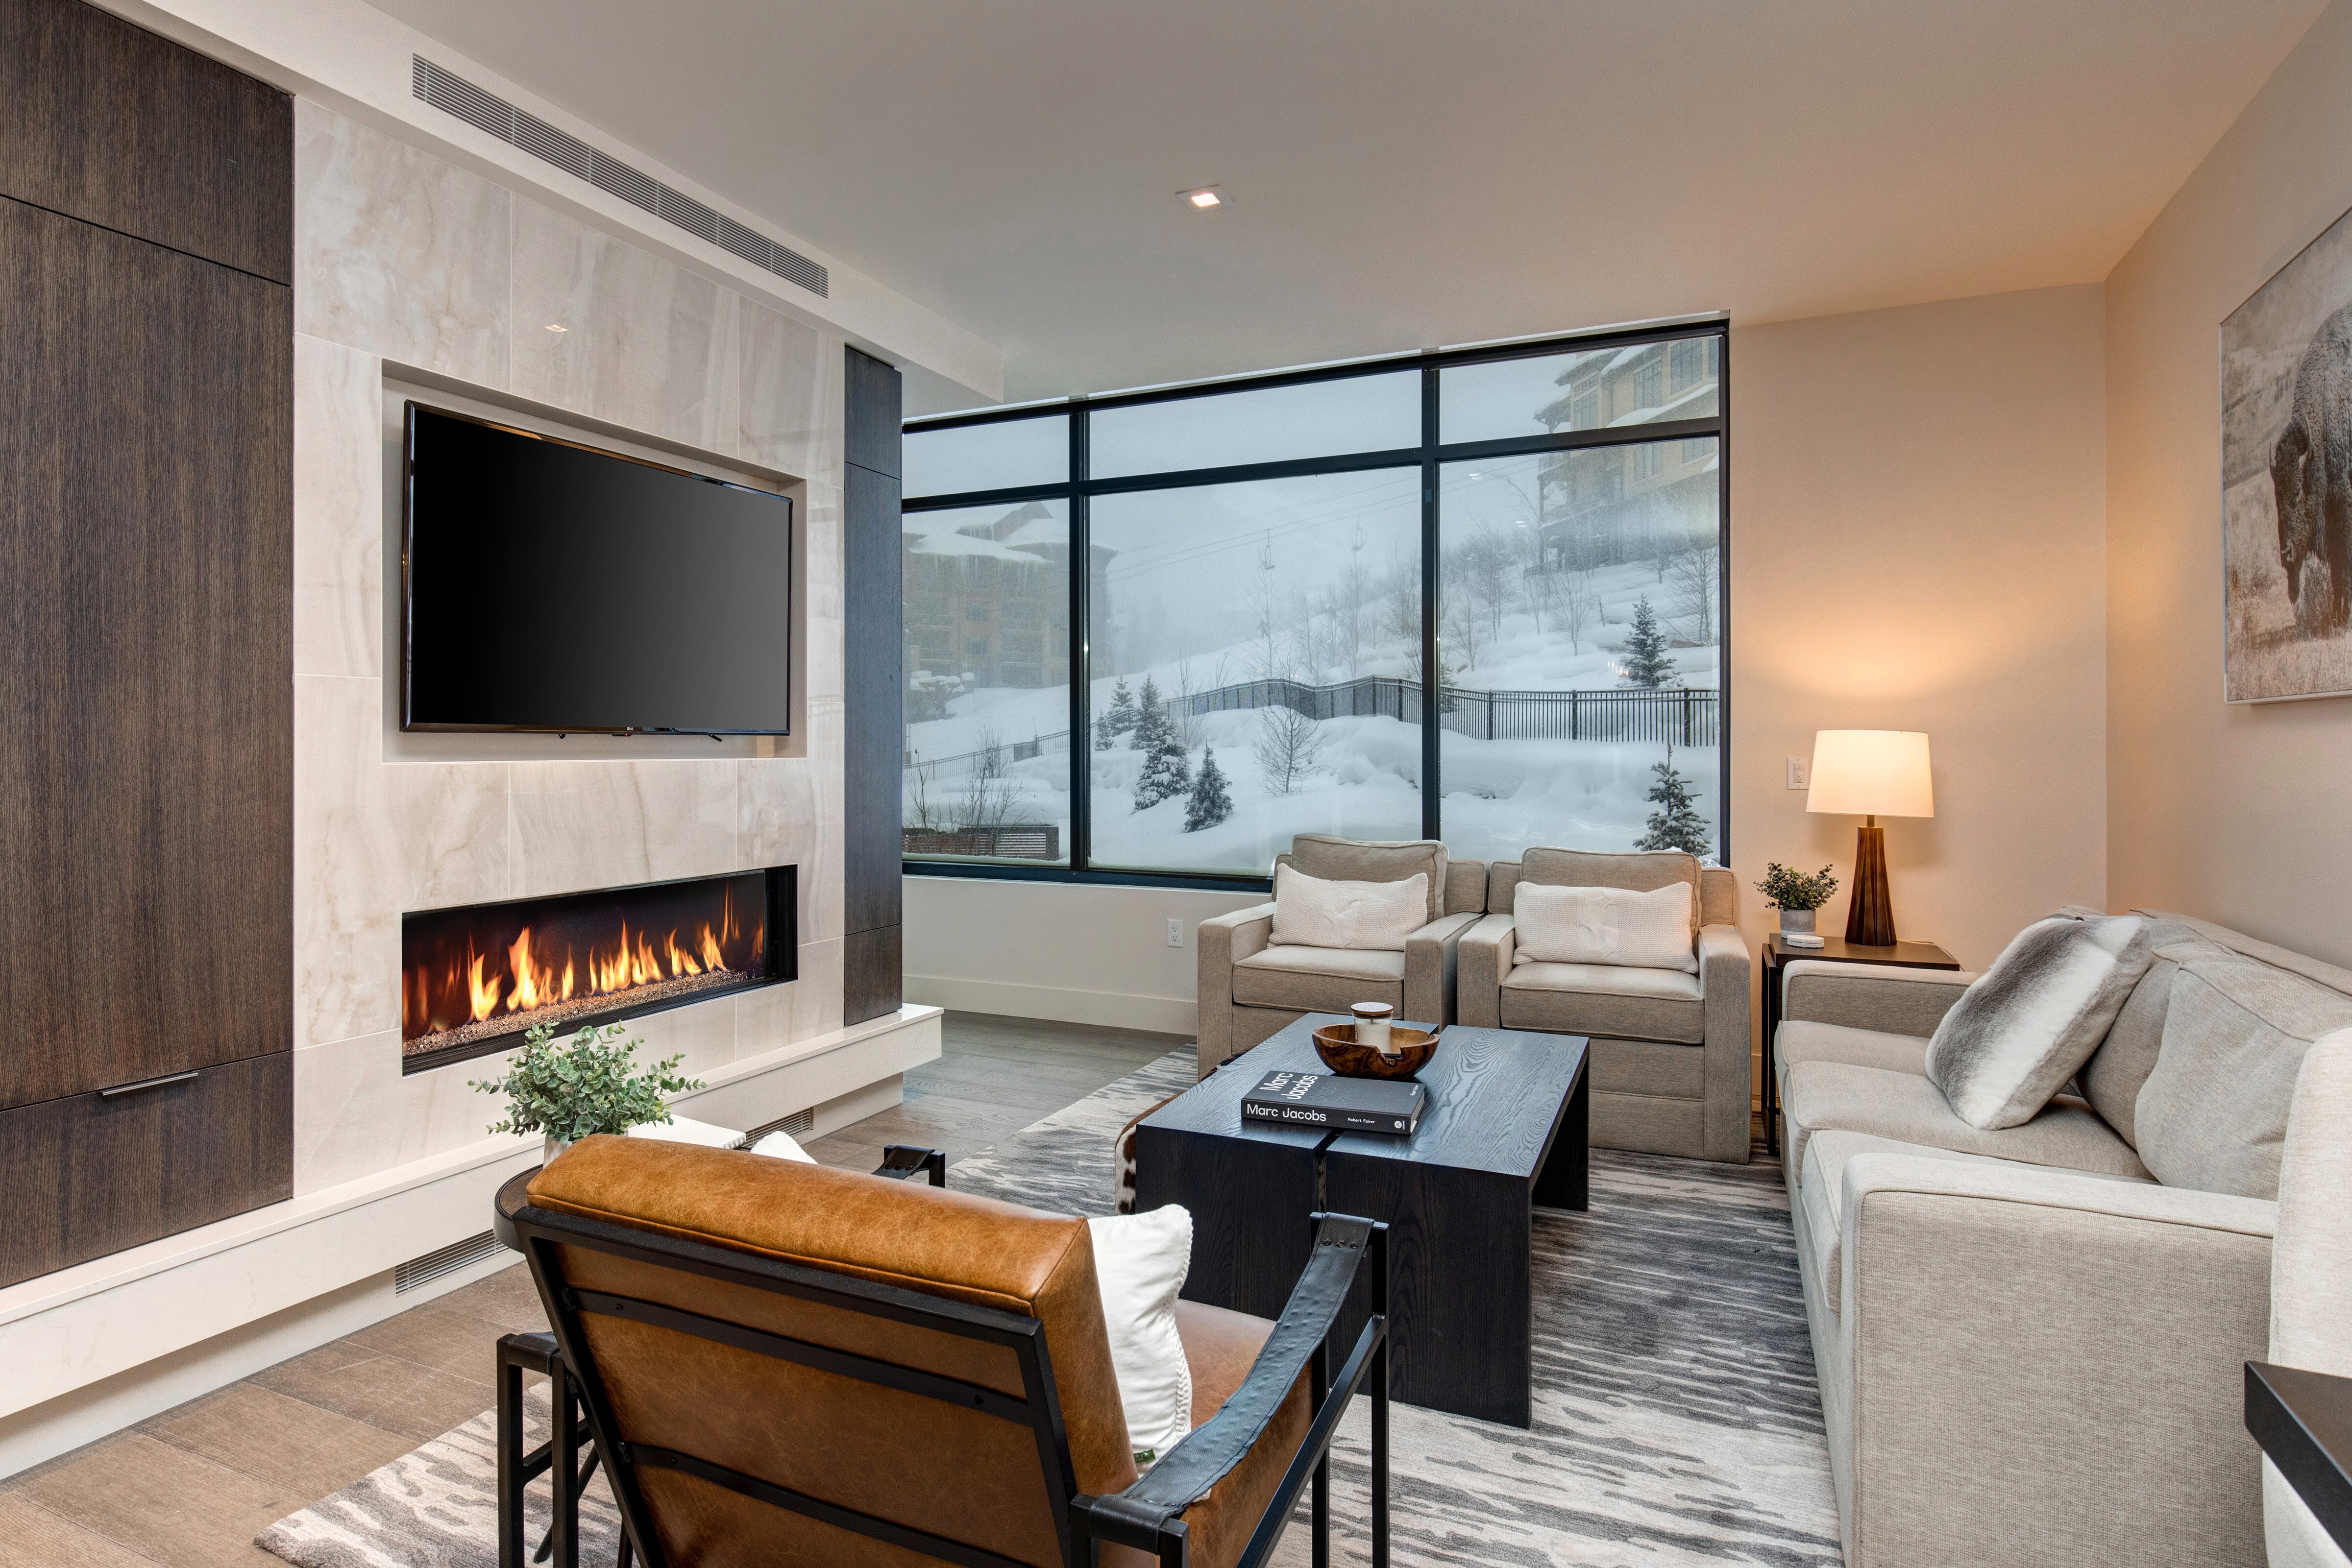 Living Room with 55" LG Smart TV, Gas Fireplace, and Private Balcony Access